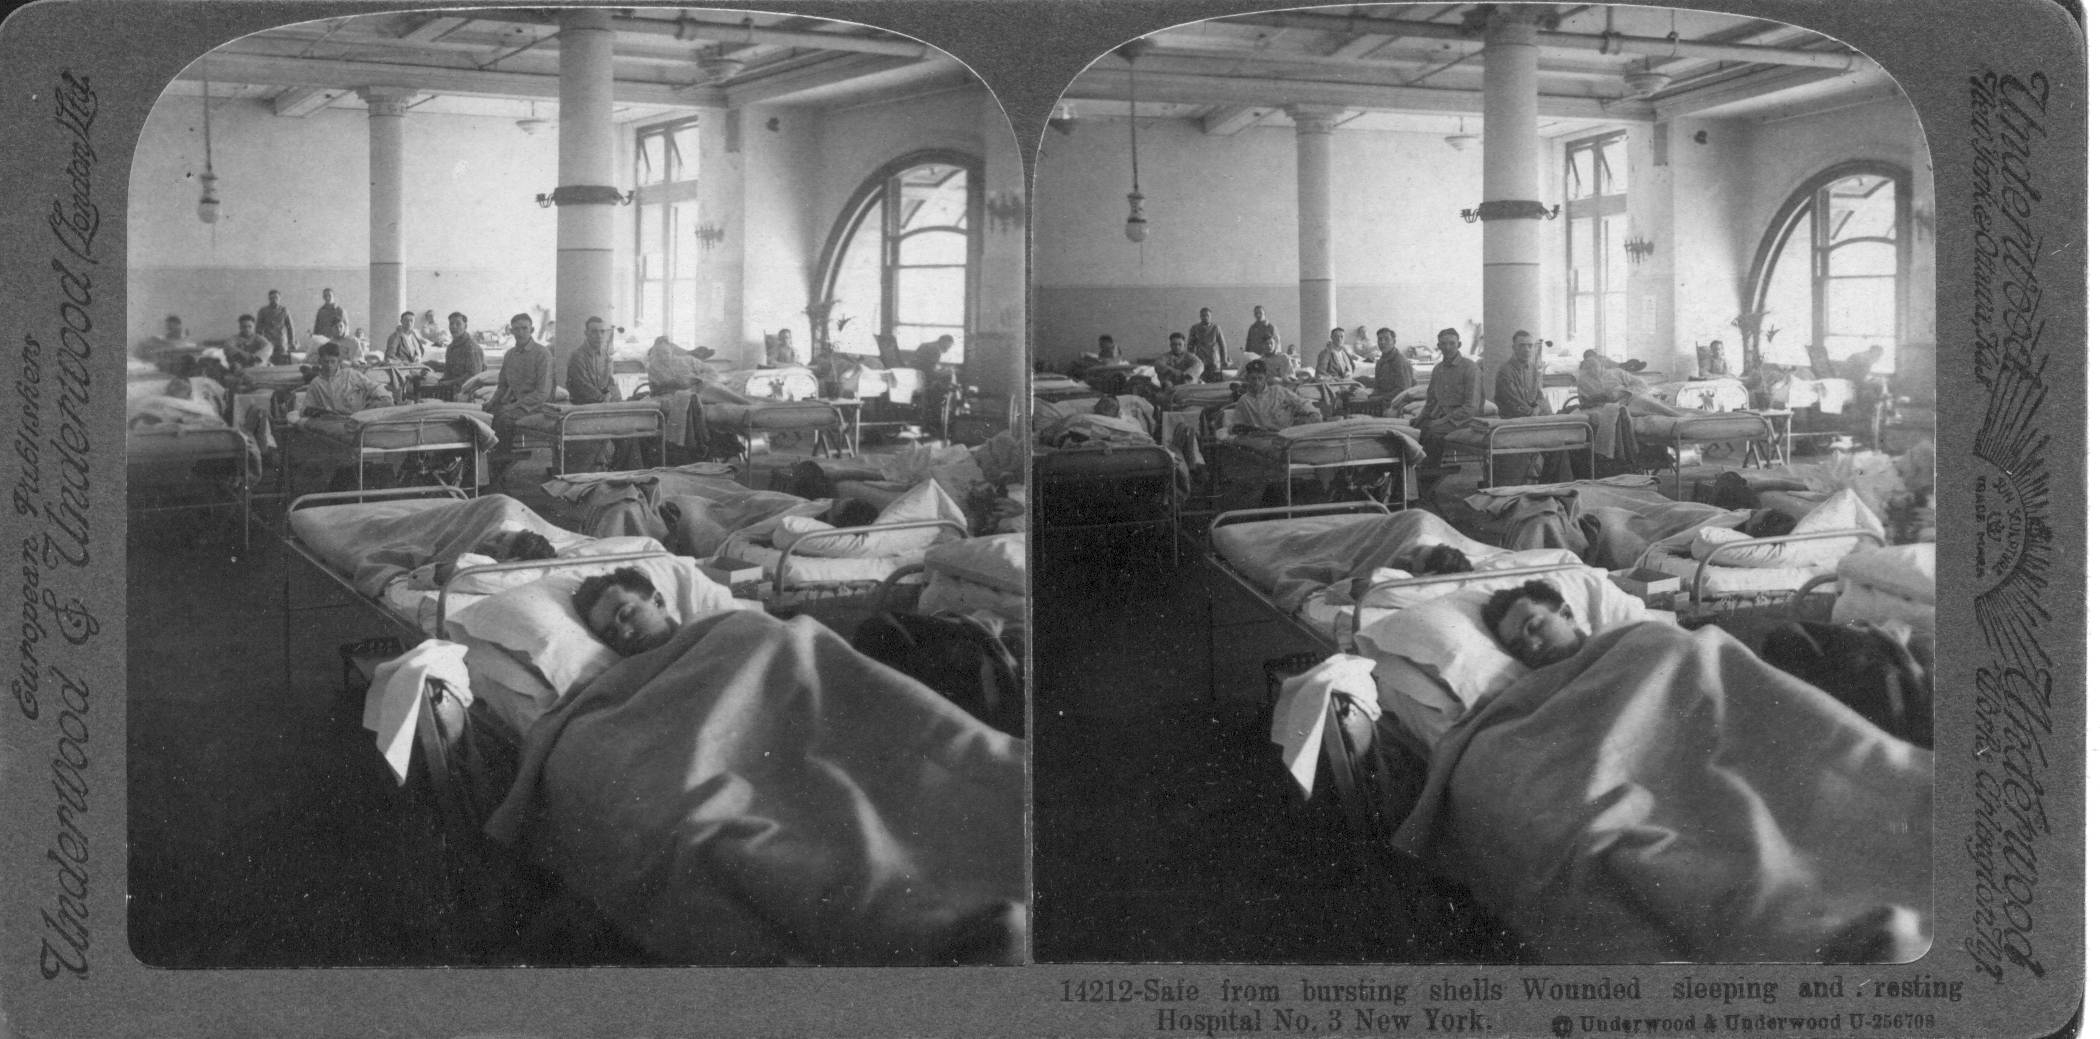 Safe from bursting shells Wounded sleeping and resting Hospital No. 3 New York